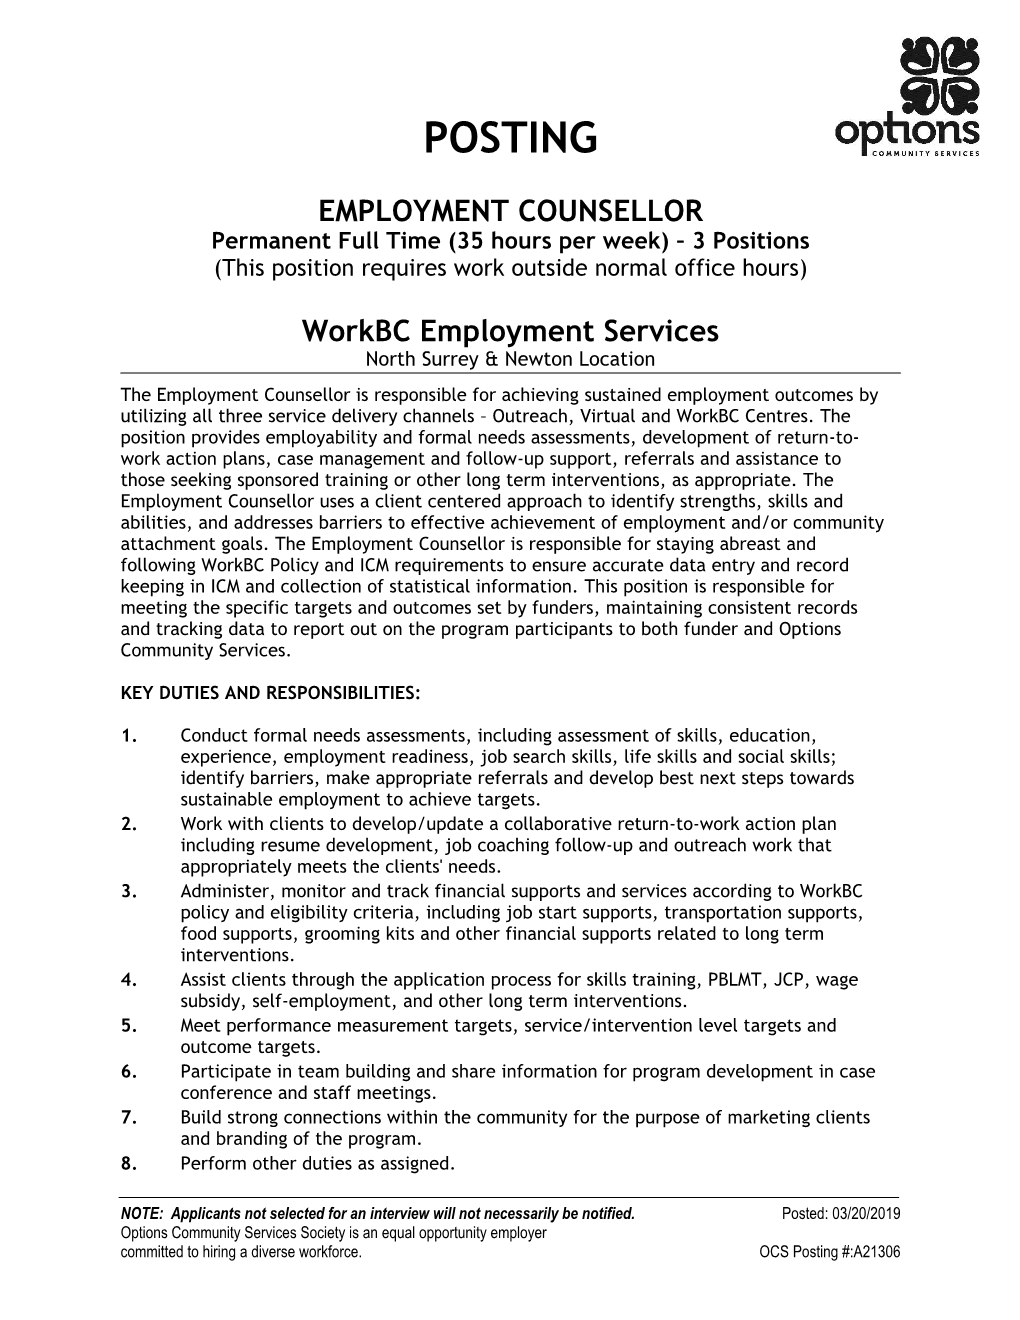 EMPLOYMENT COUNSELLOR Permanent Full Time (35 Hours Per Week) – 3 Positions (This Position Requires Work Outside Normal Office Hours)